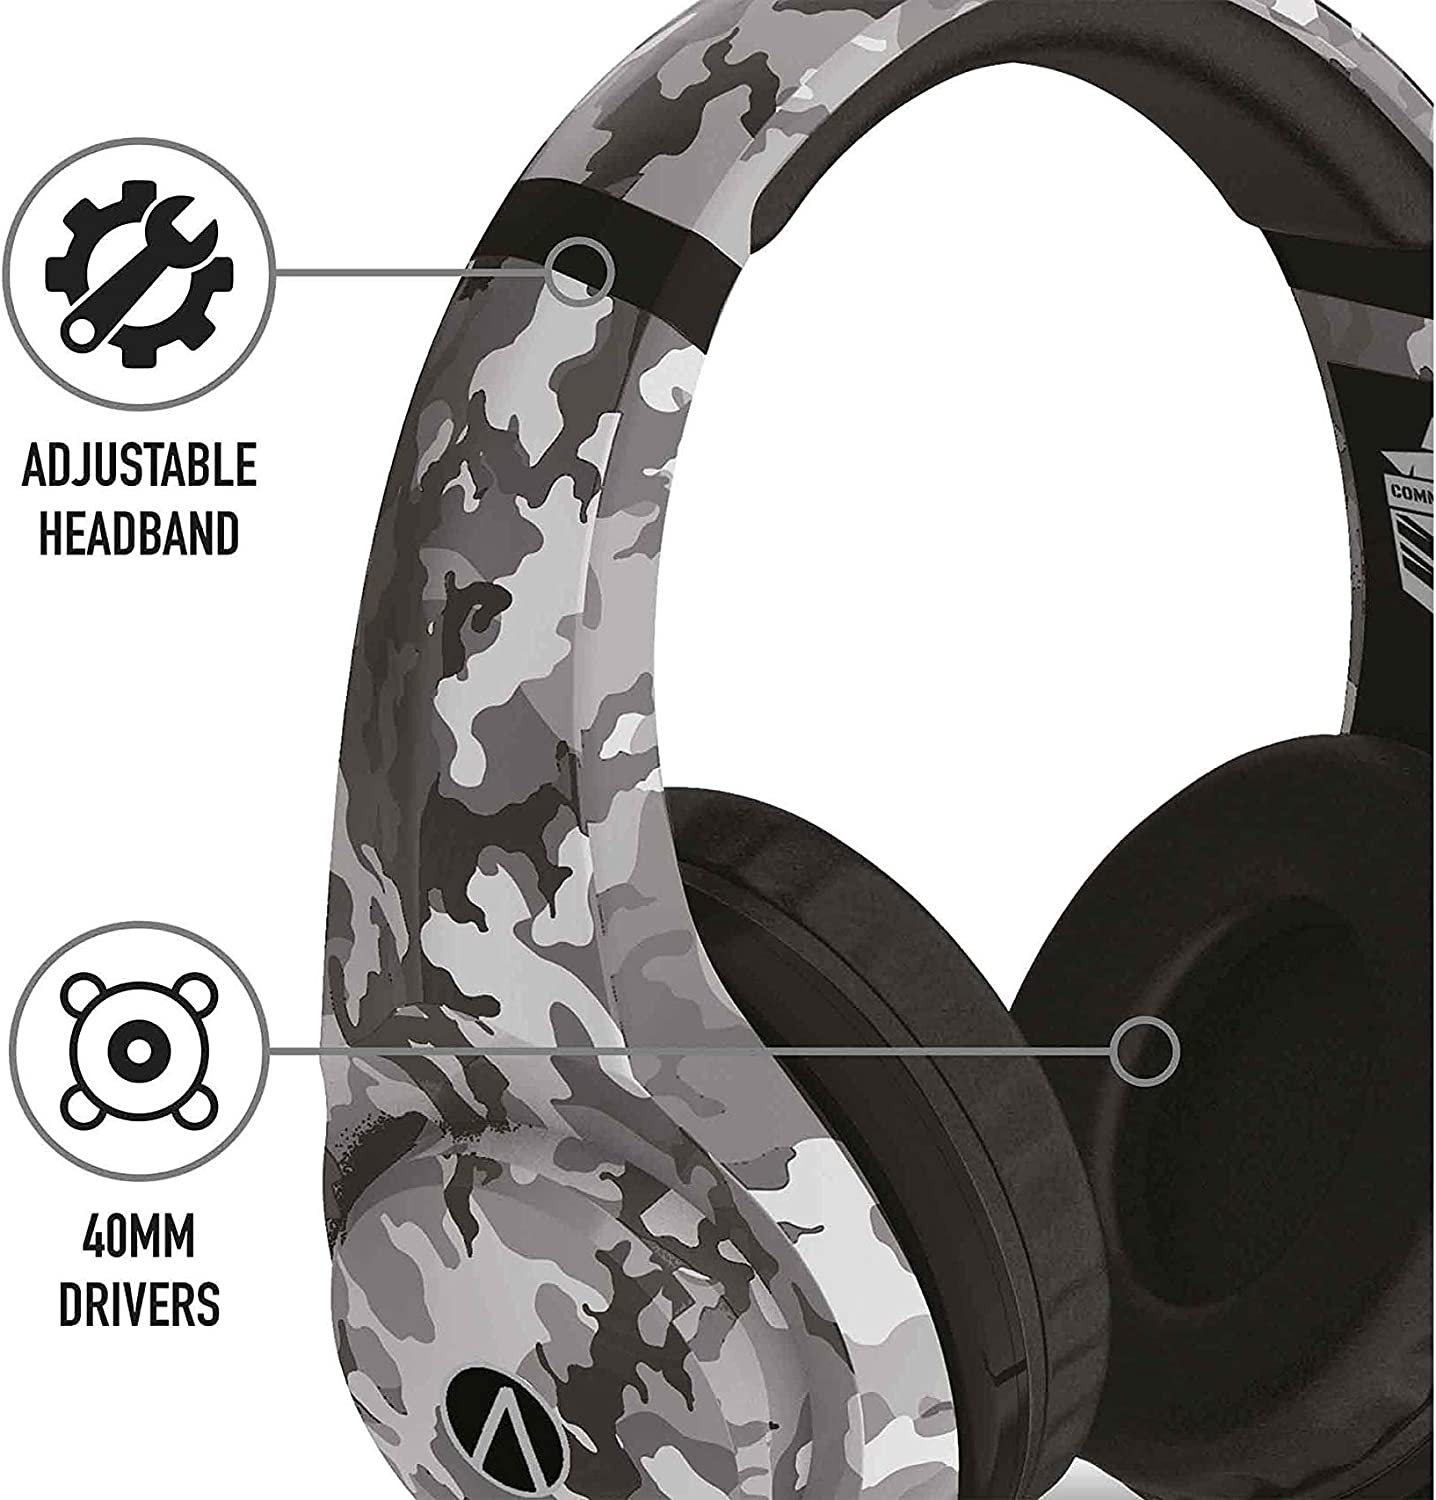 Stealth XP Commander Headset